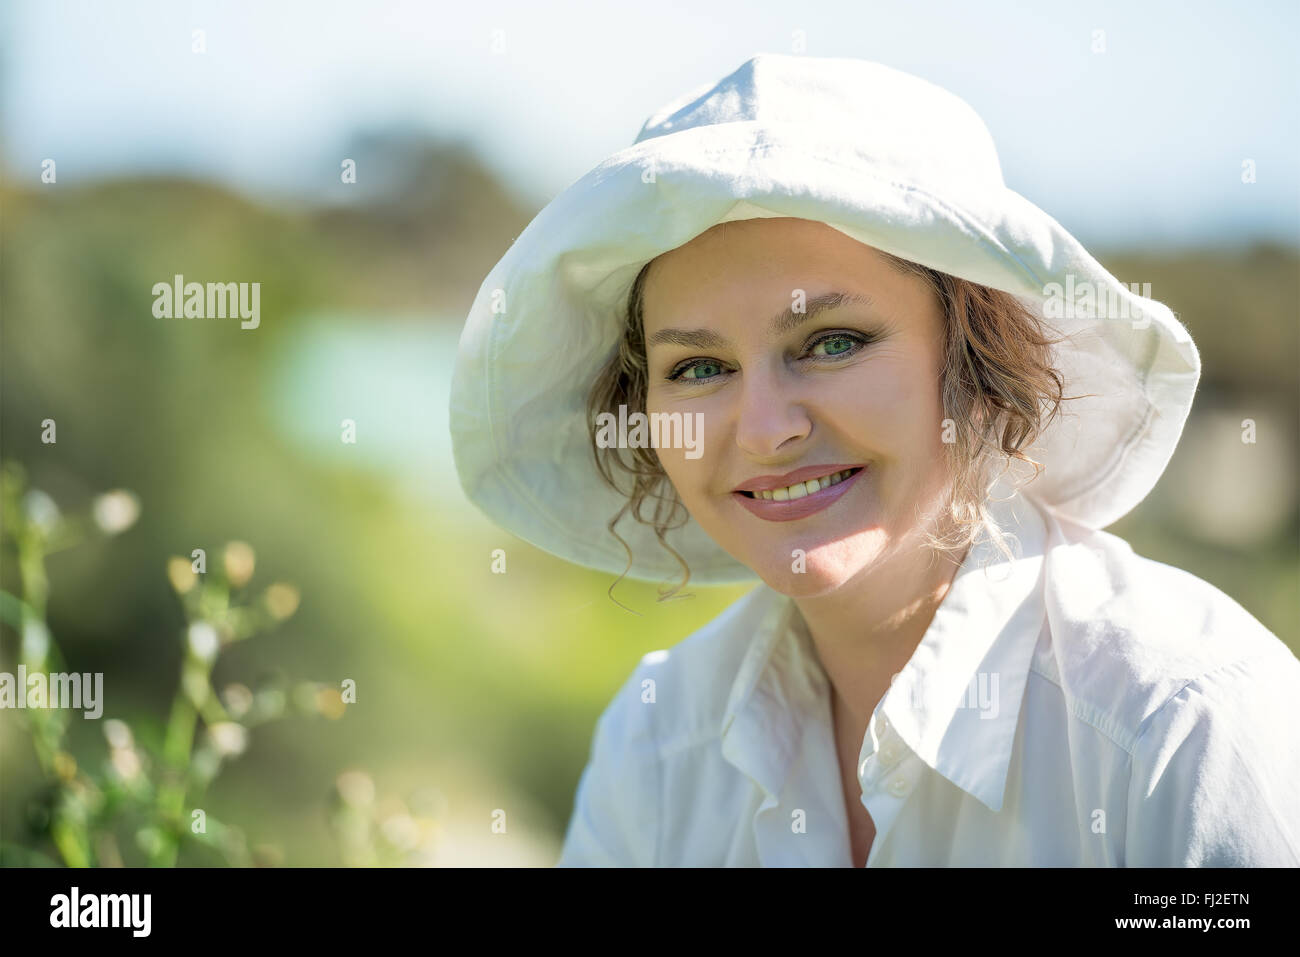 Happy woman in white hat and shirt is smiling outdoors Stock Photo